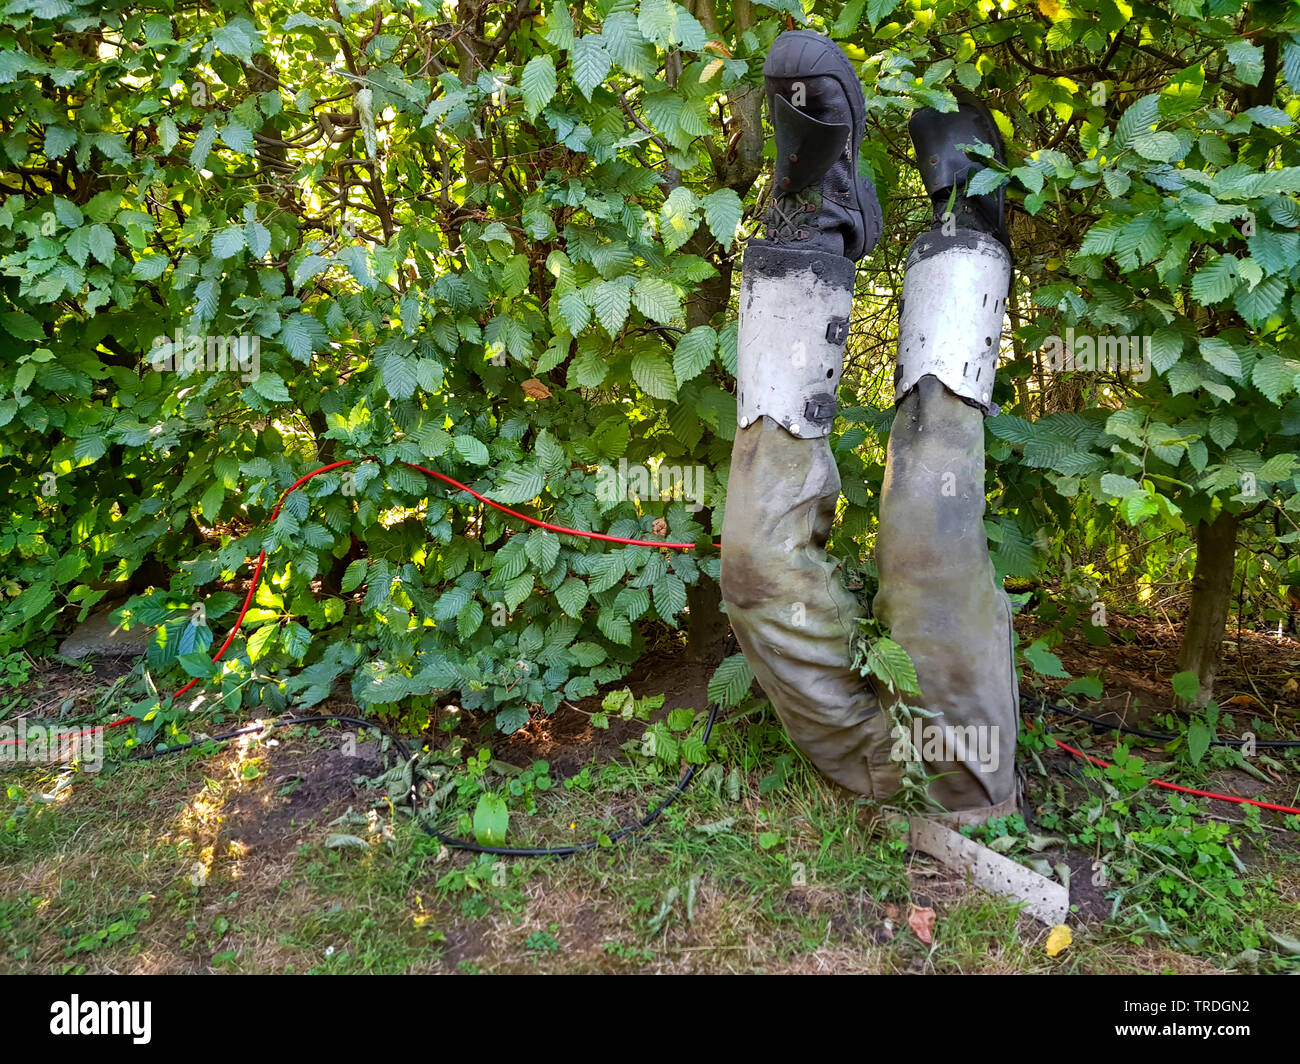 sculpture of mineworker stuck head first in the soil, Germany Stock Photo